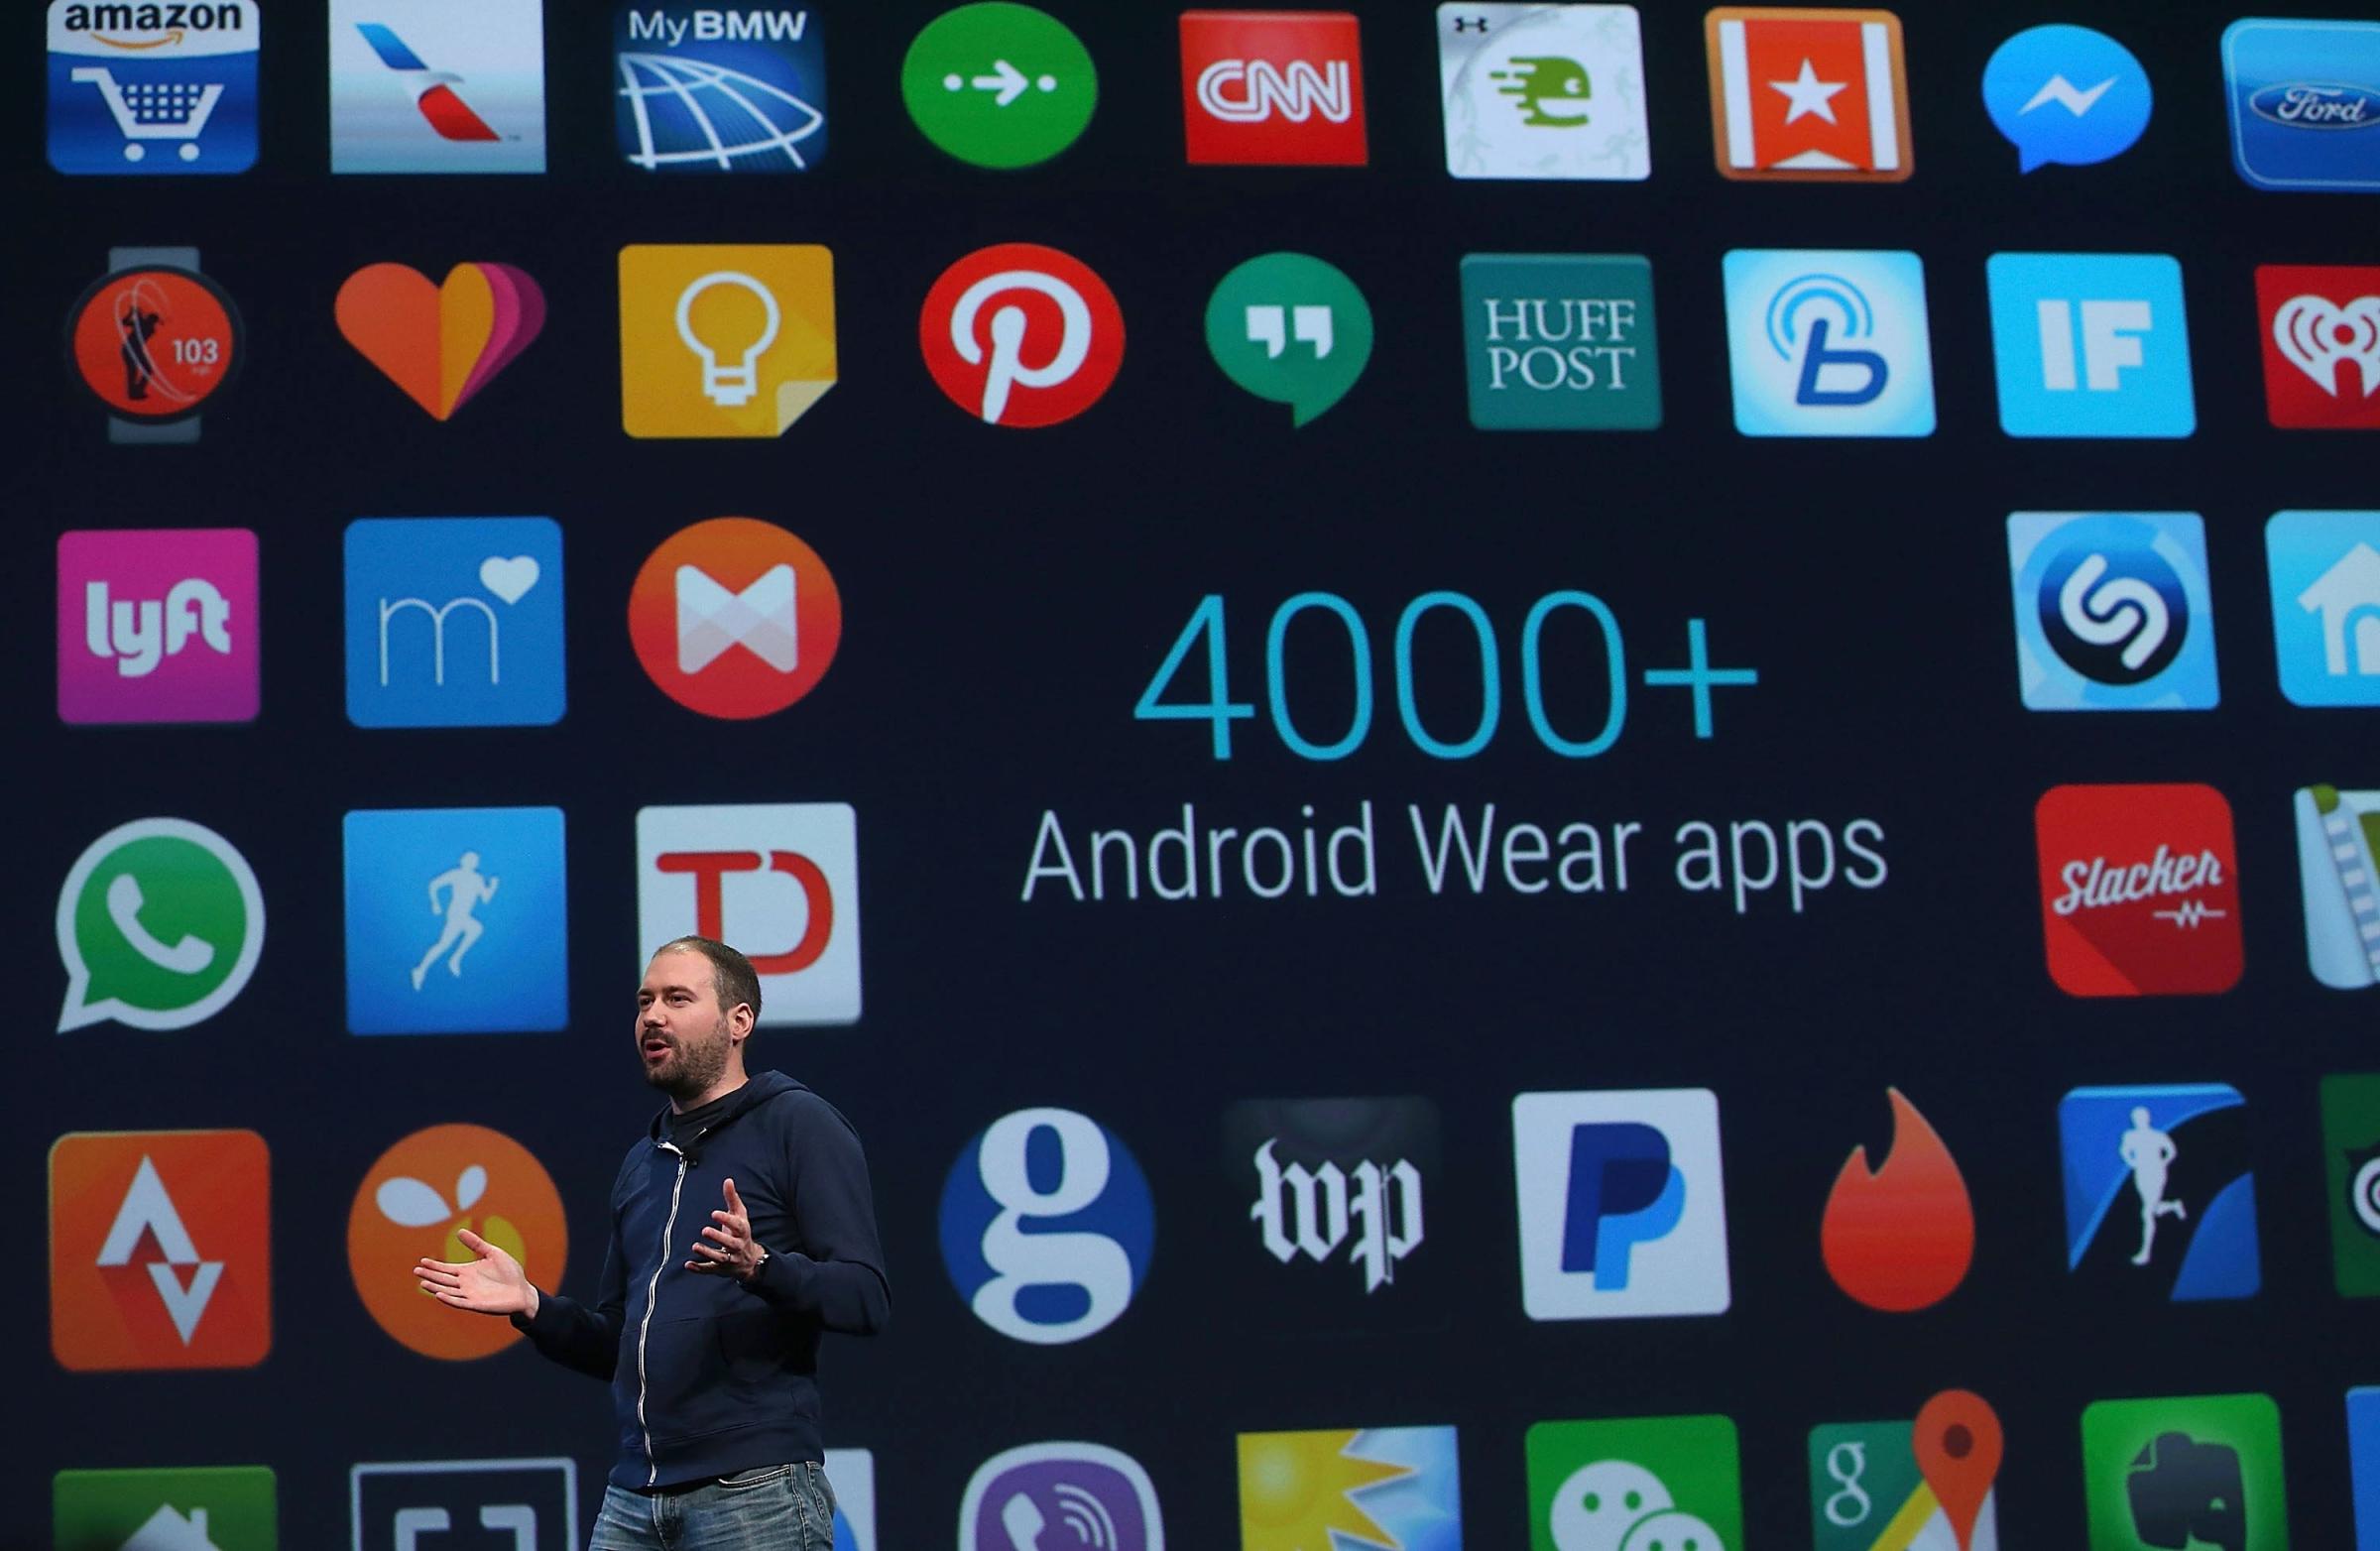 Google Android Wear director David Singleton announces Androidwear updates during the 2015 Google I/O conference on May 28, 2015 in San Francisco.